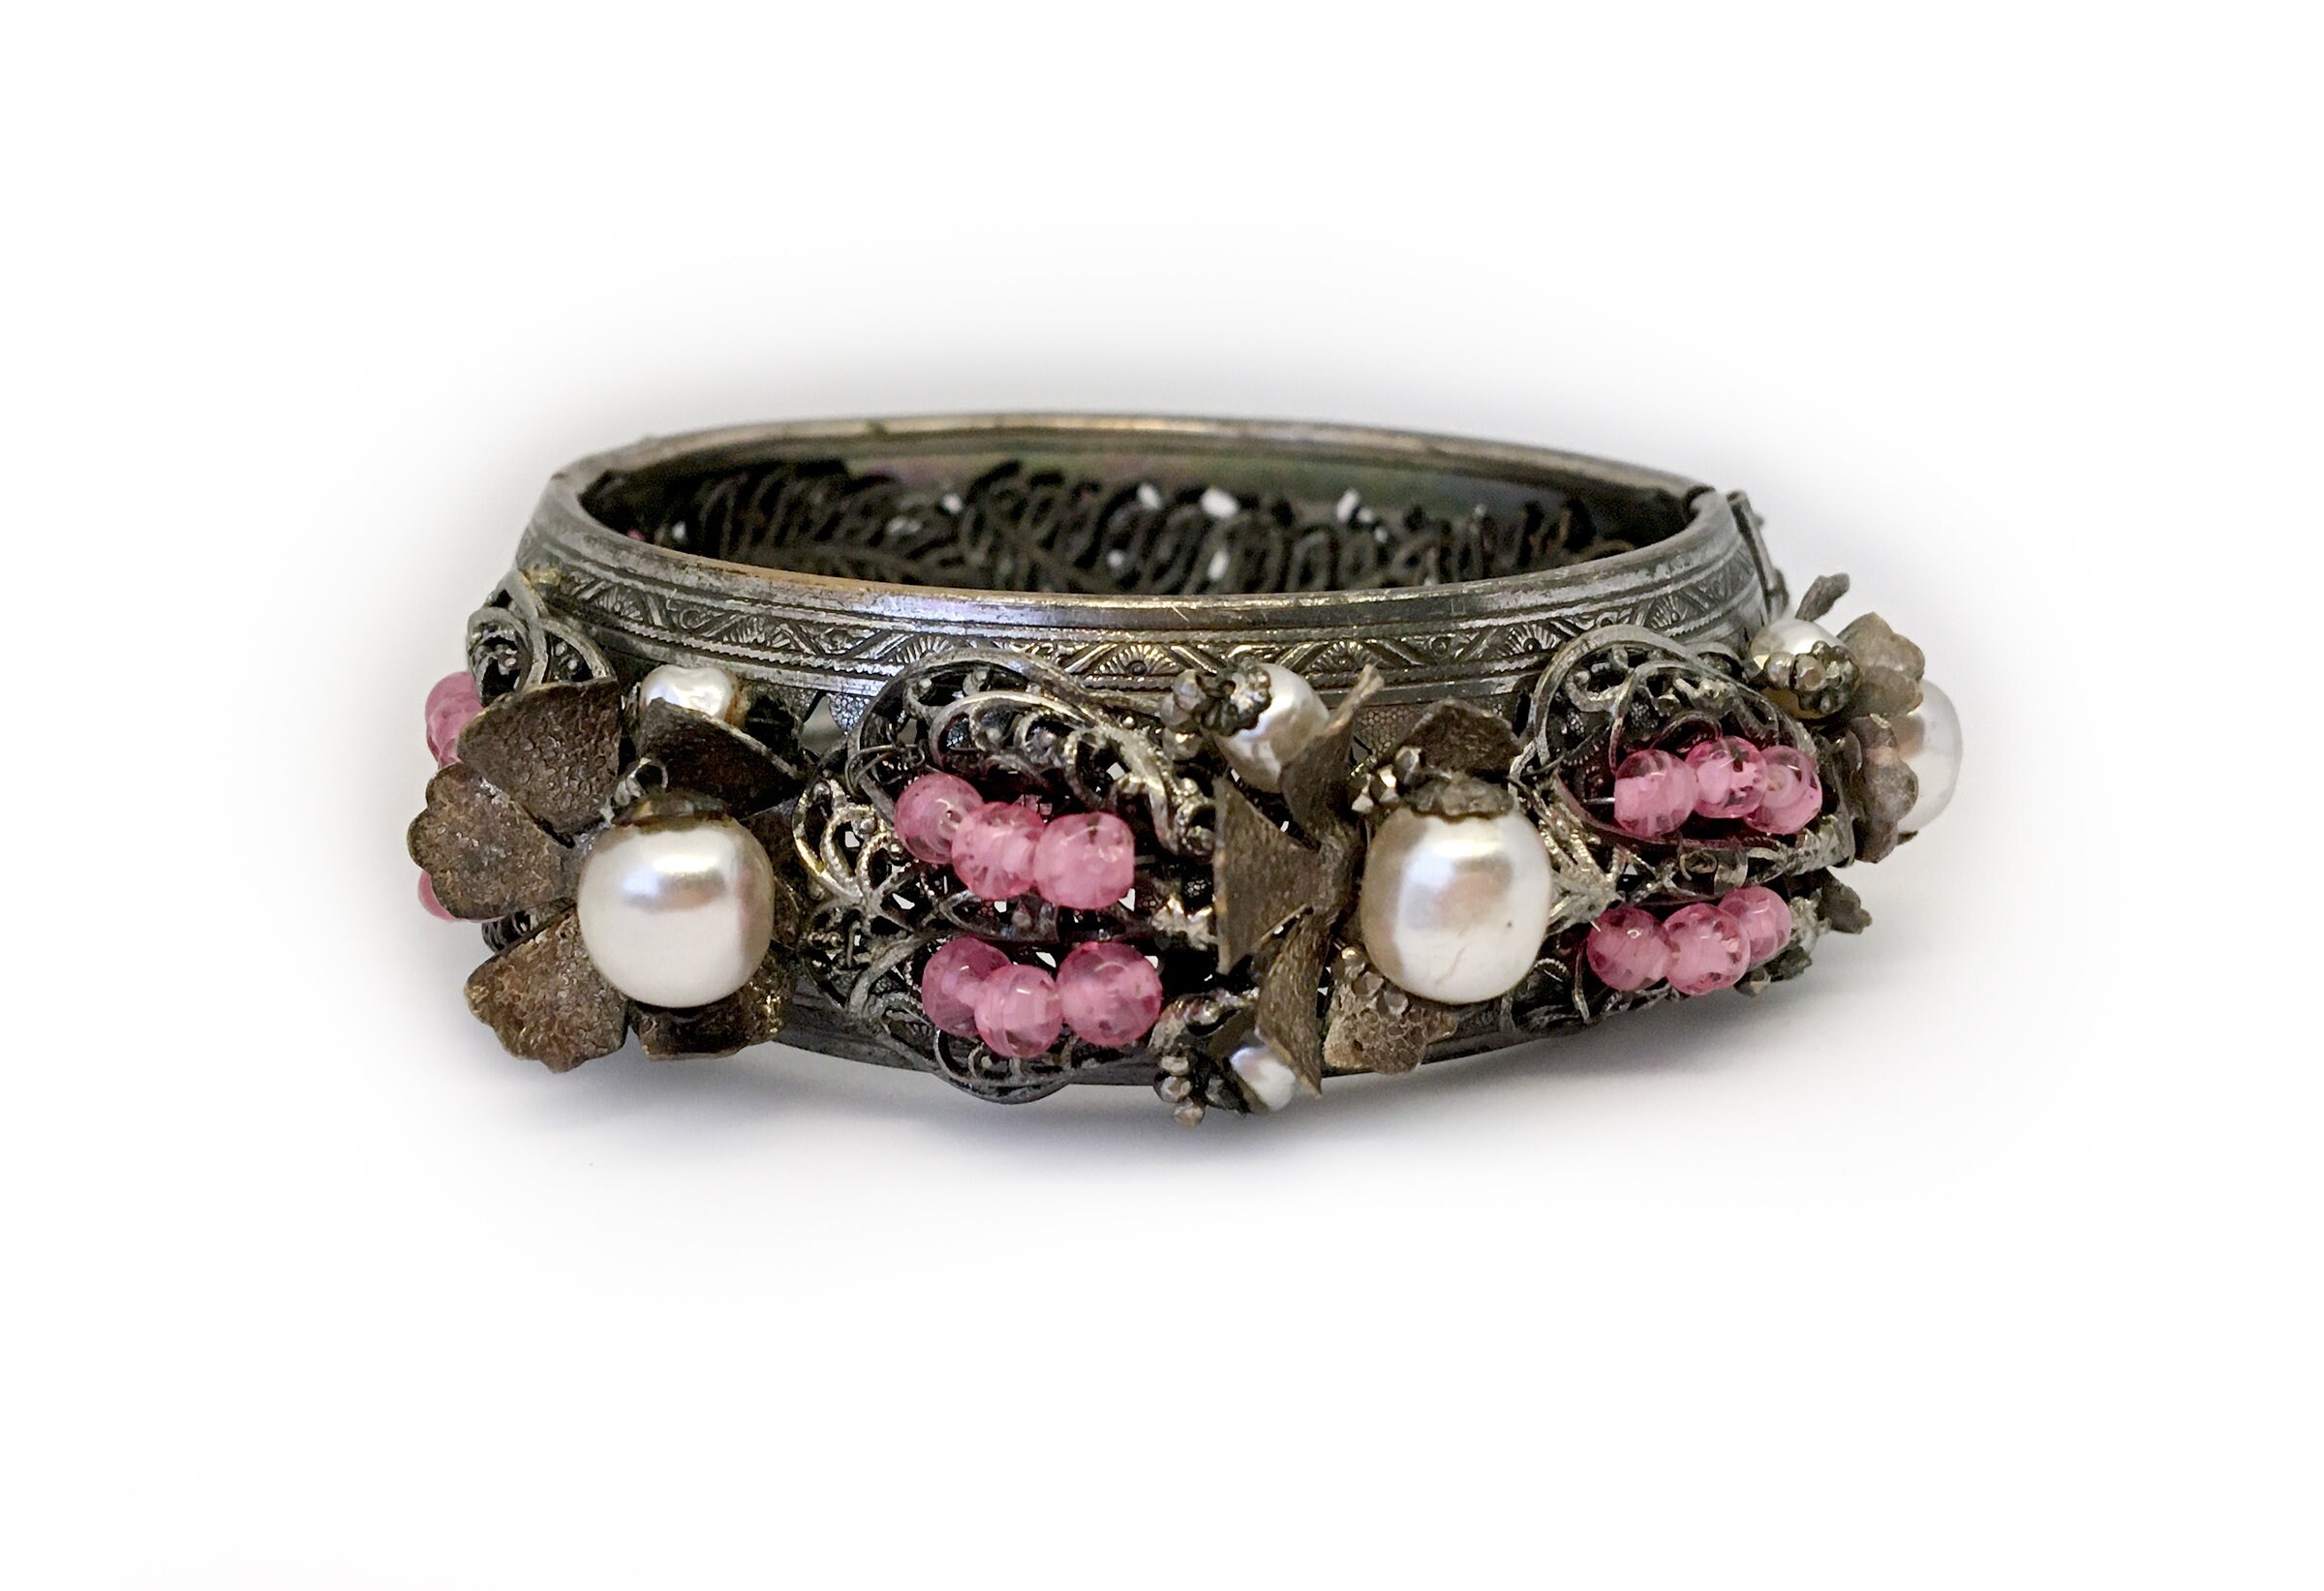 Haskell Floral Bangle Bracelet with Faux Baroque Pearls & Pink Art